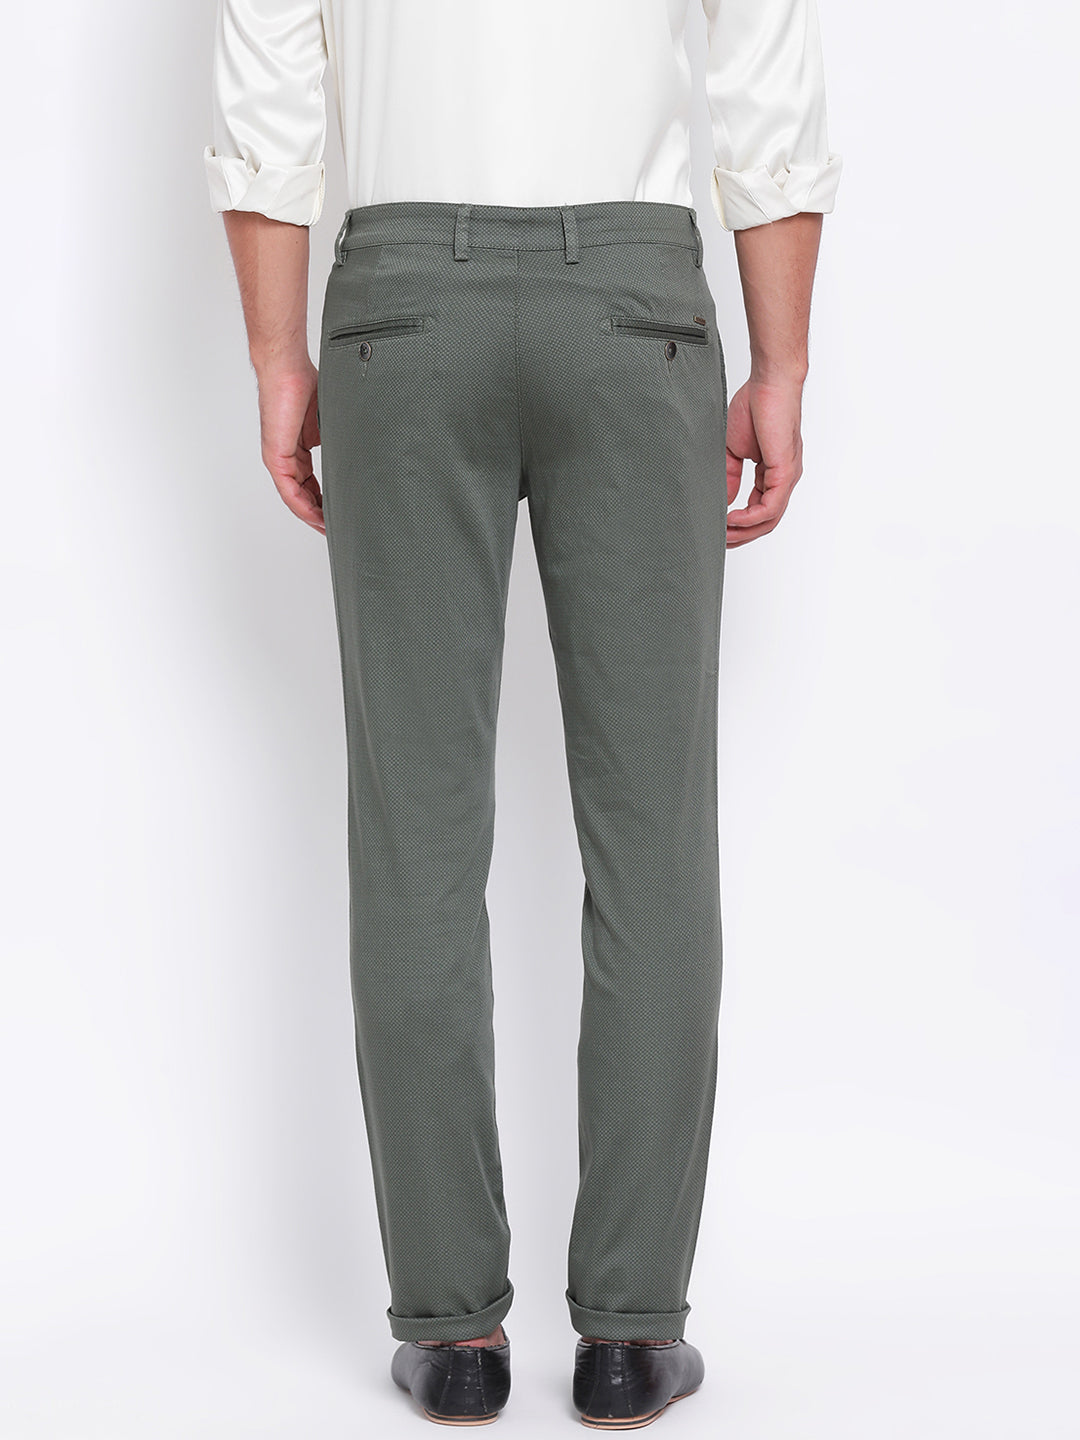 Cotton Stretch Olive Printed Narrow Fit Flat Front Casual Trouser